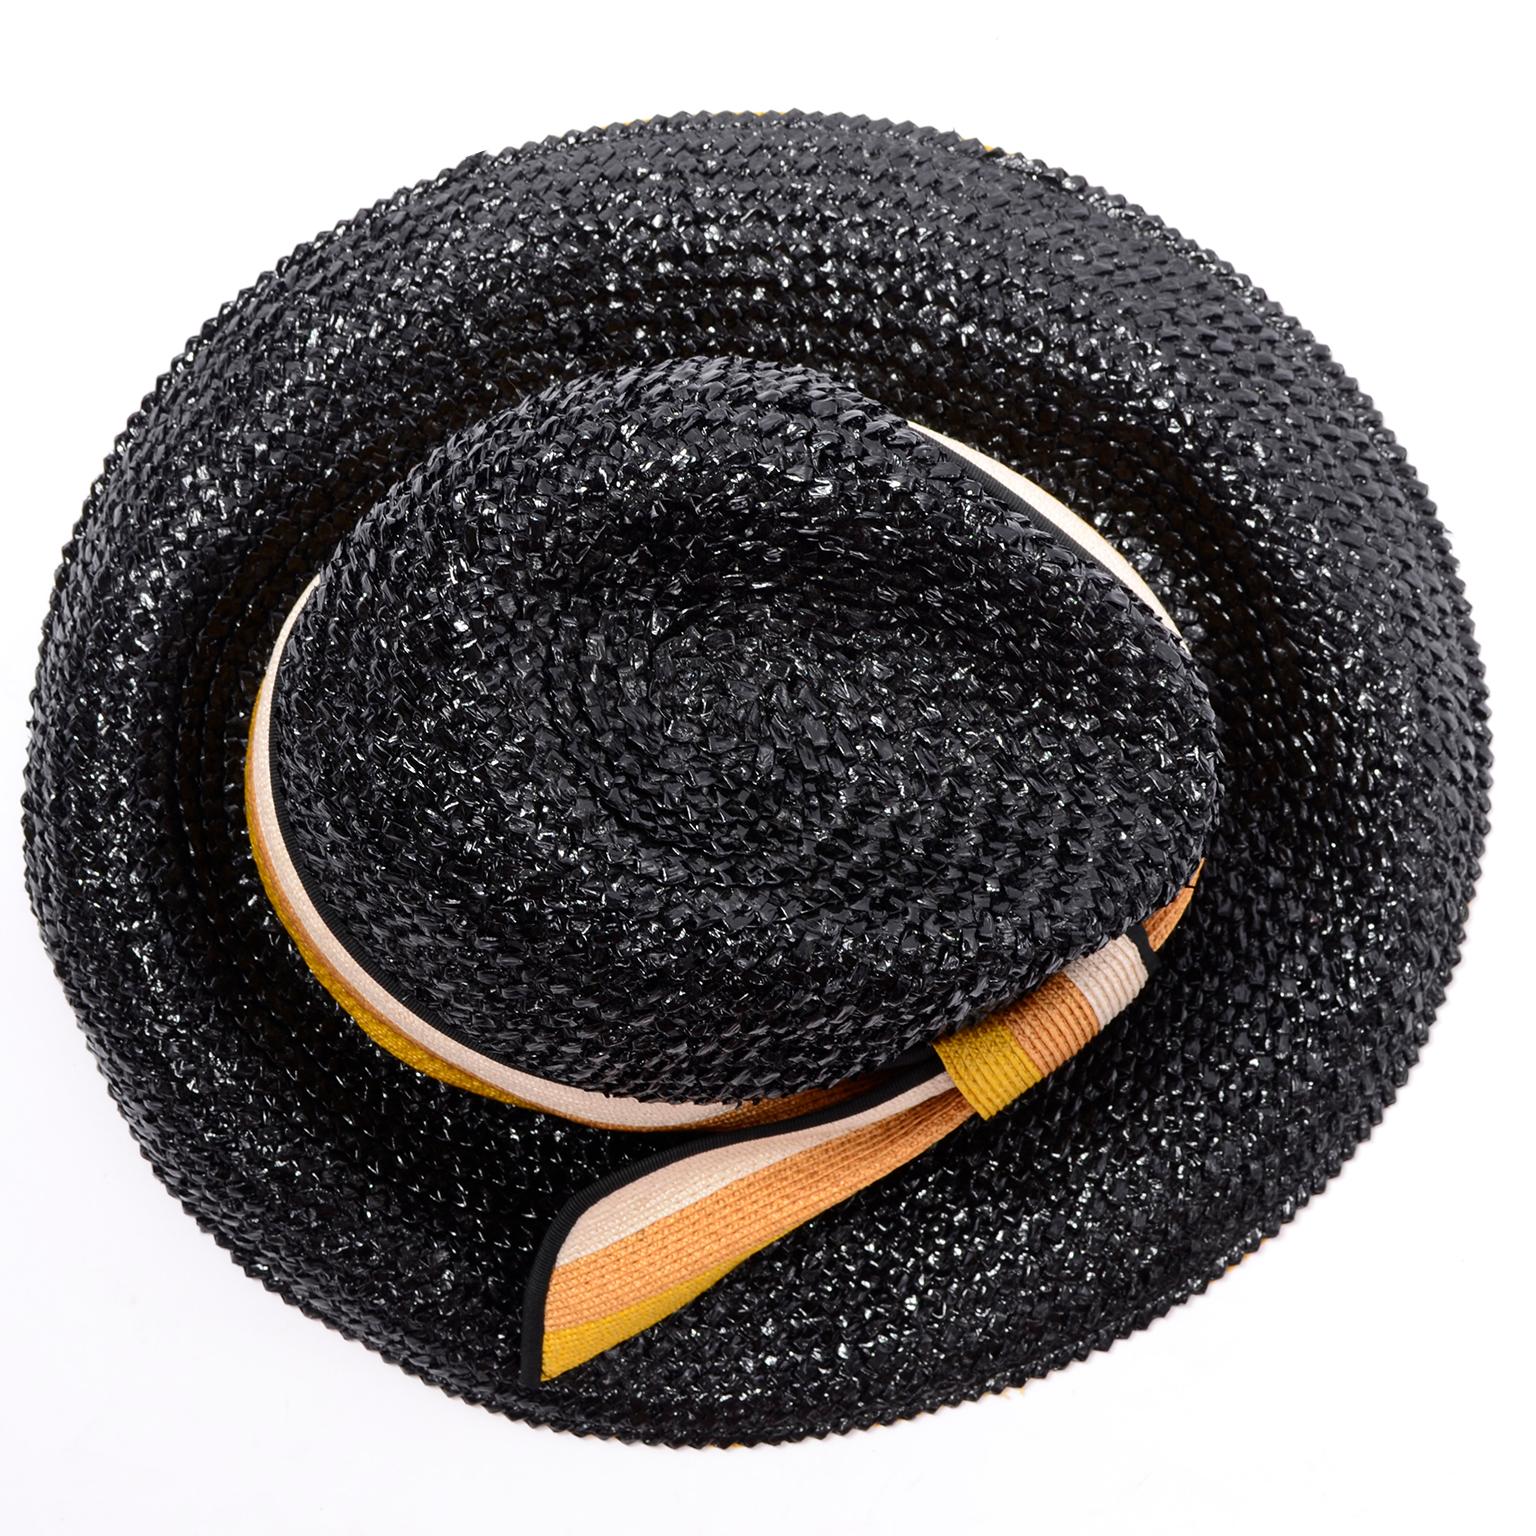 Black 1960s Deadstock Vintage Yves Saint Laurent Straw Hat With Striped Ribbon W Tag